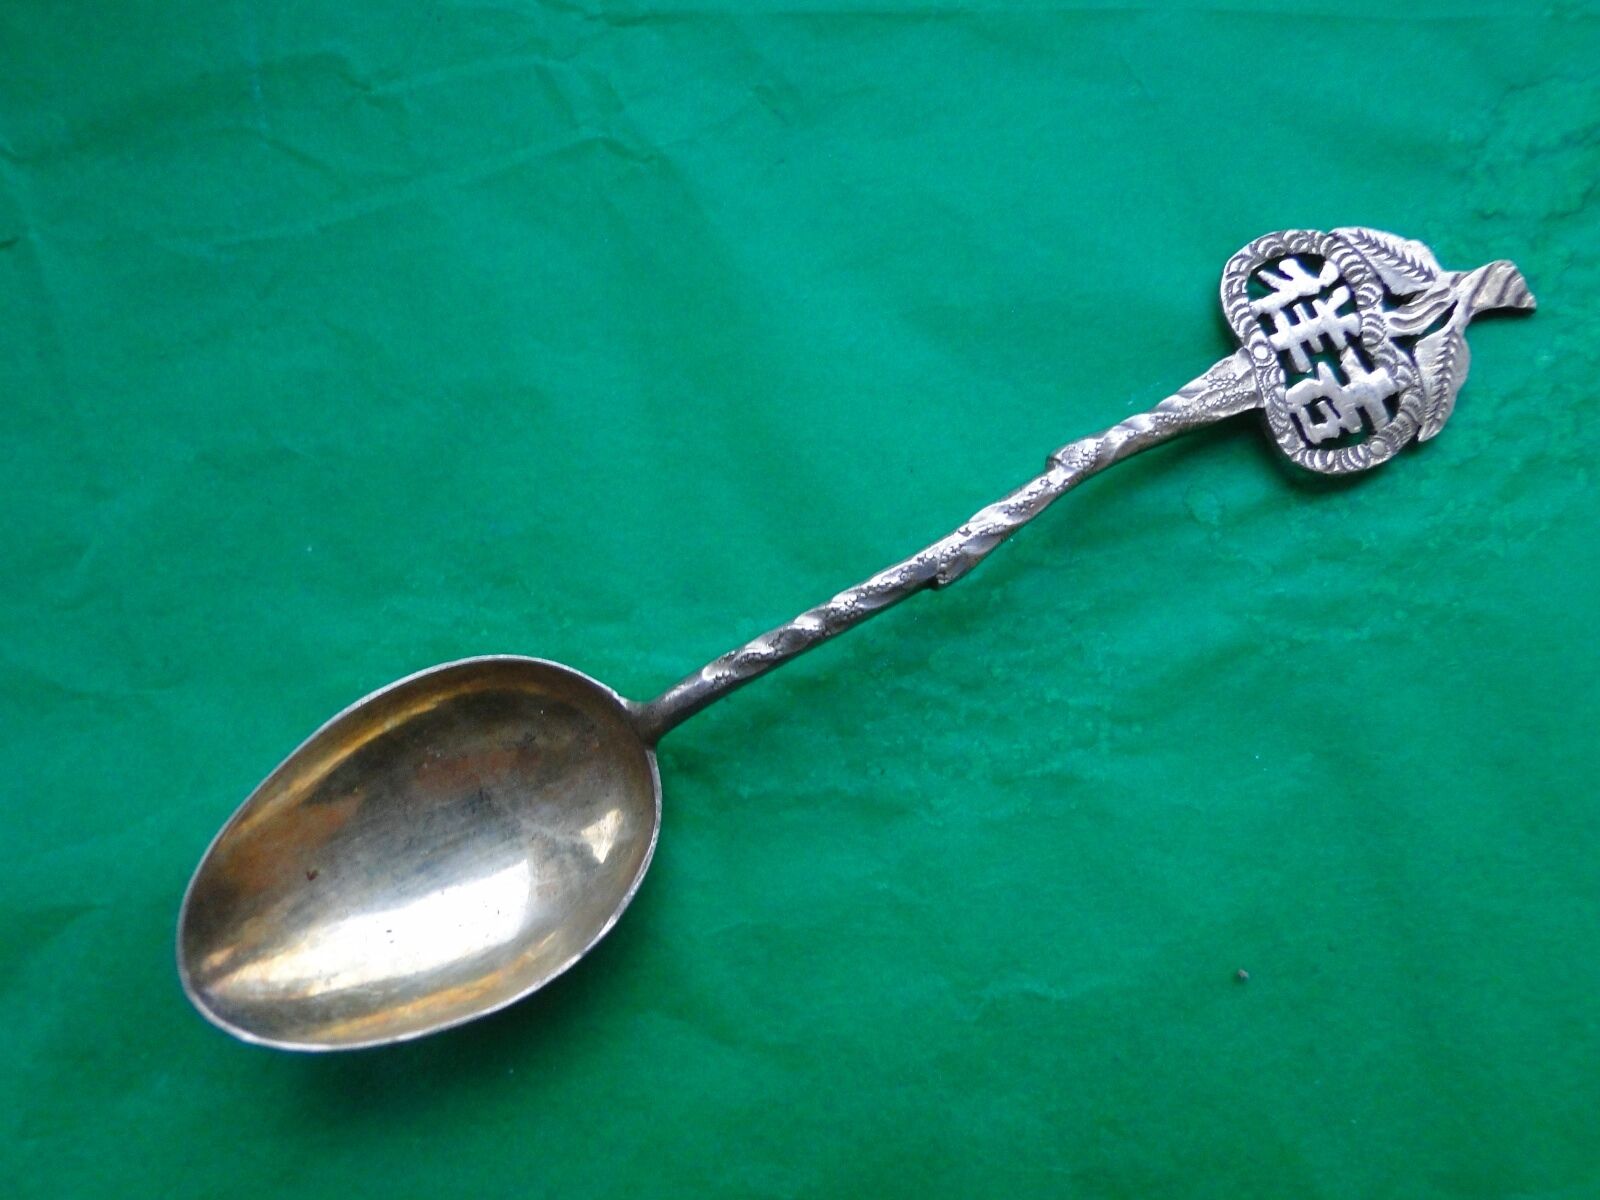 Chinese Tea Spoon, Sterling Silver, Naturalistic Design, C- 1900, Pierced